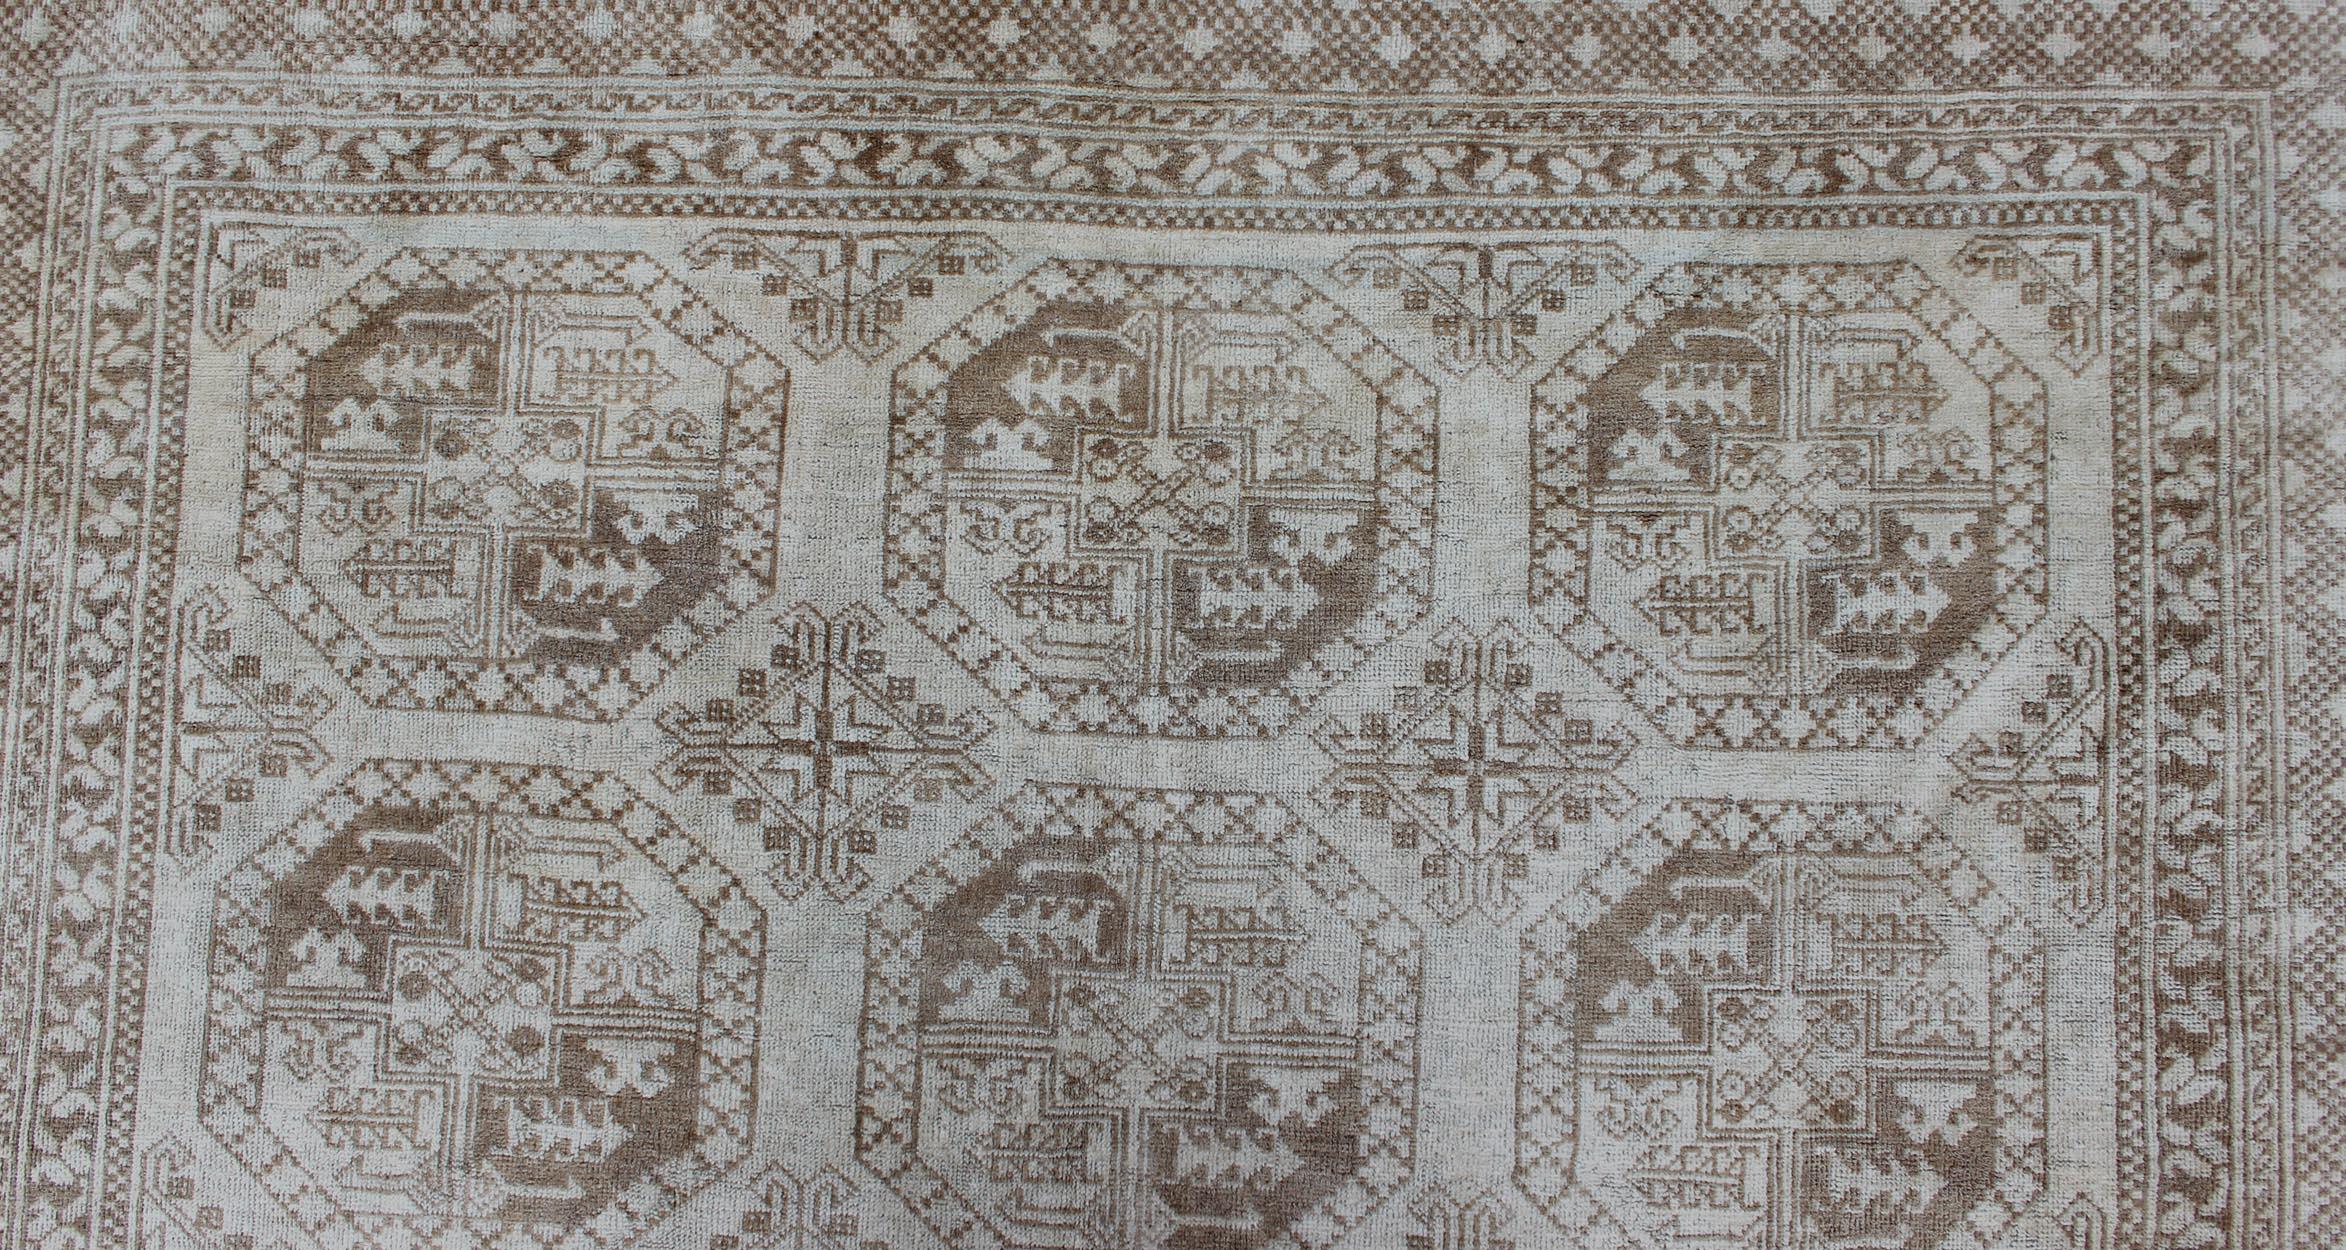 Turkish Rug with Multi-Medallions in Tribal Ersari Design with Brown & Neutrals For Sale 2